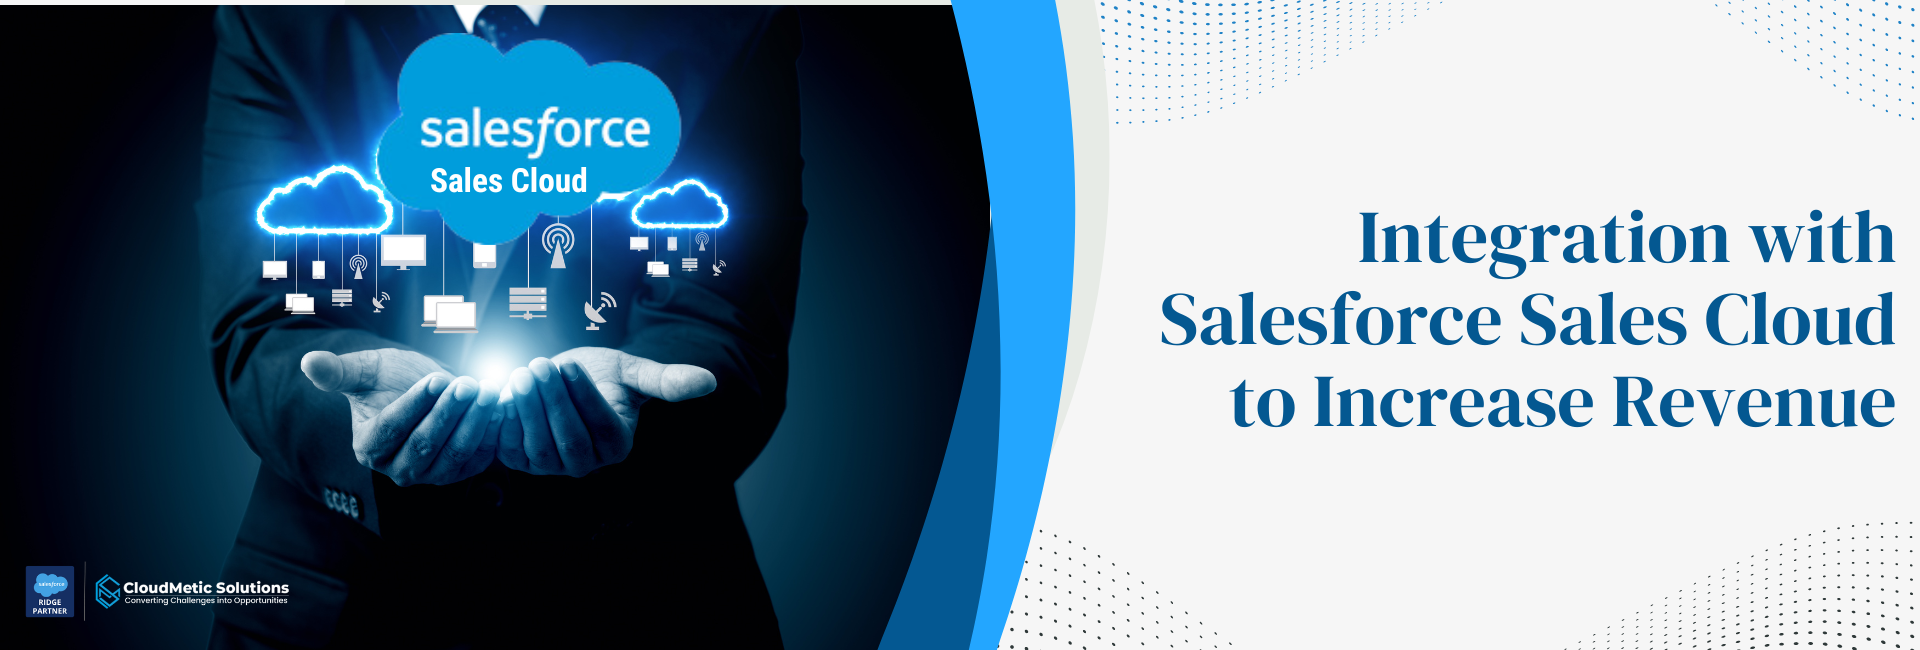 Integration with Salesforce Sales Cloud to Increase Revenue